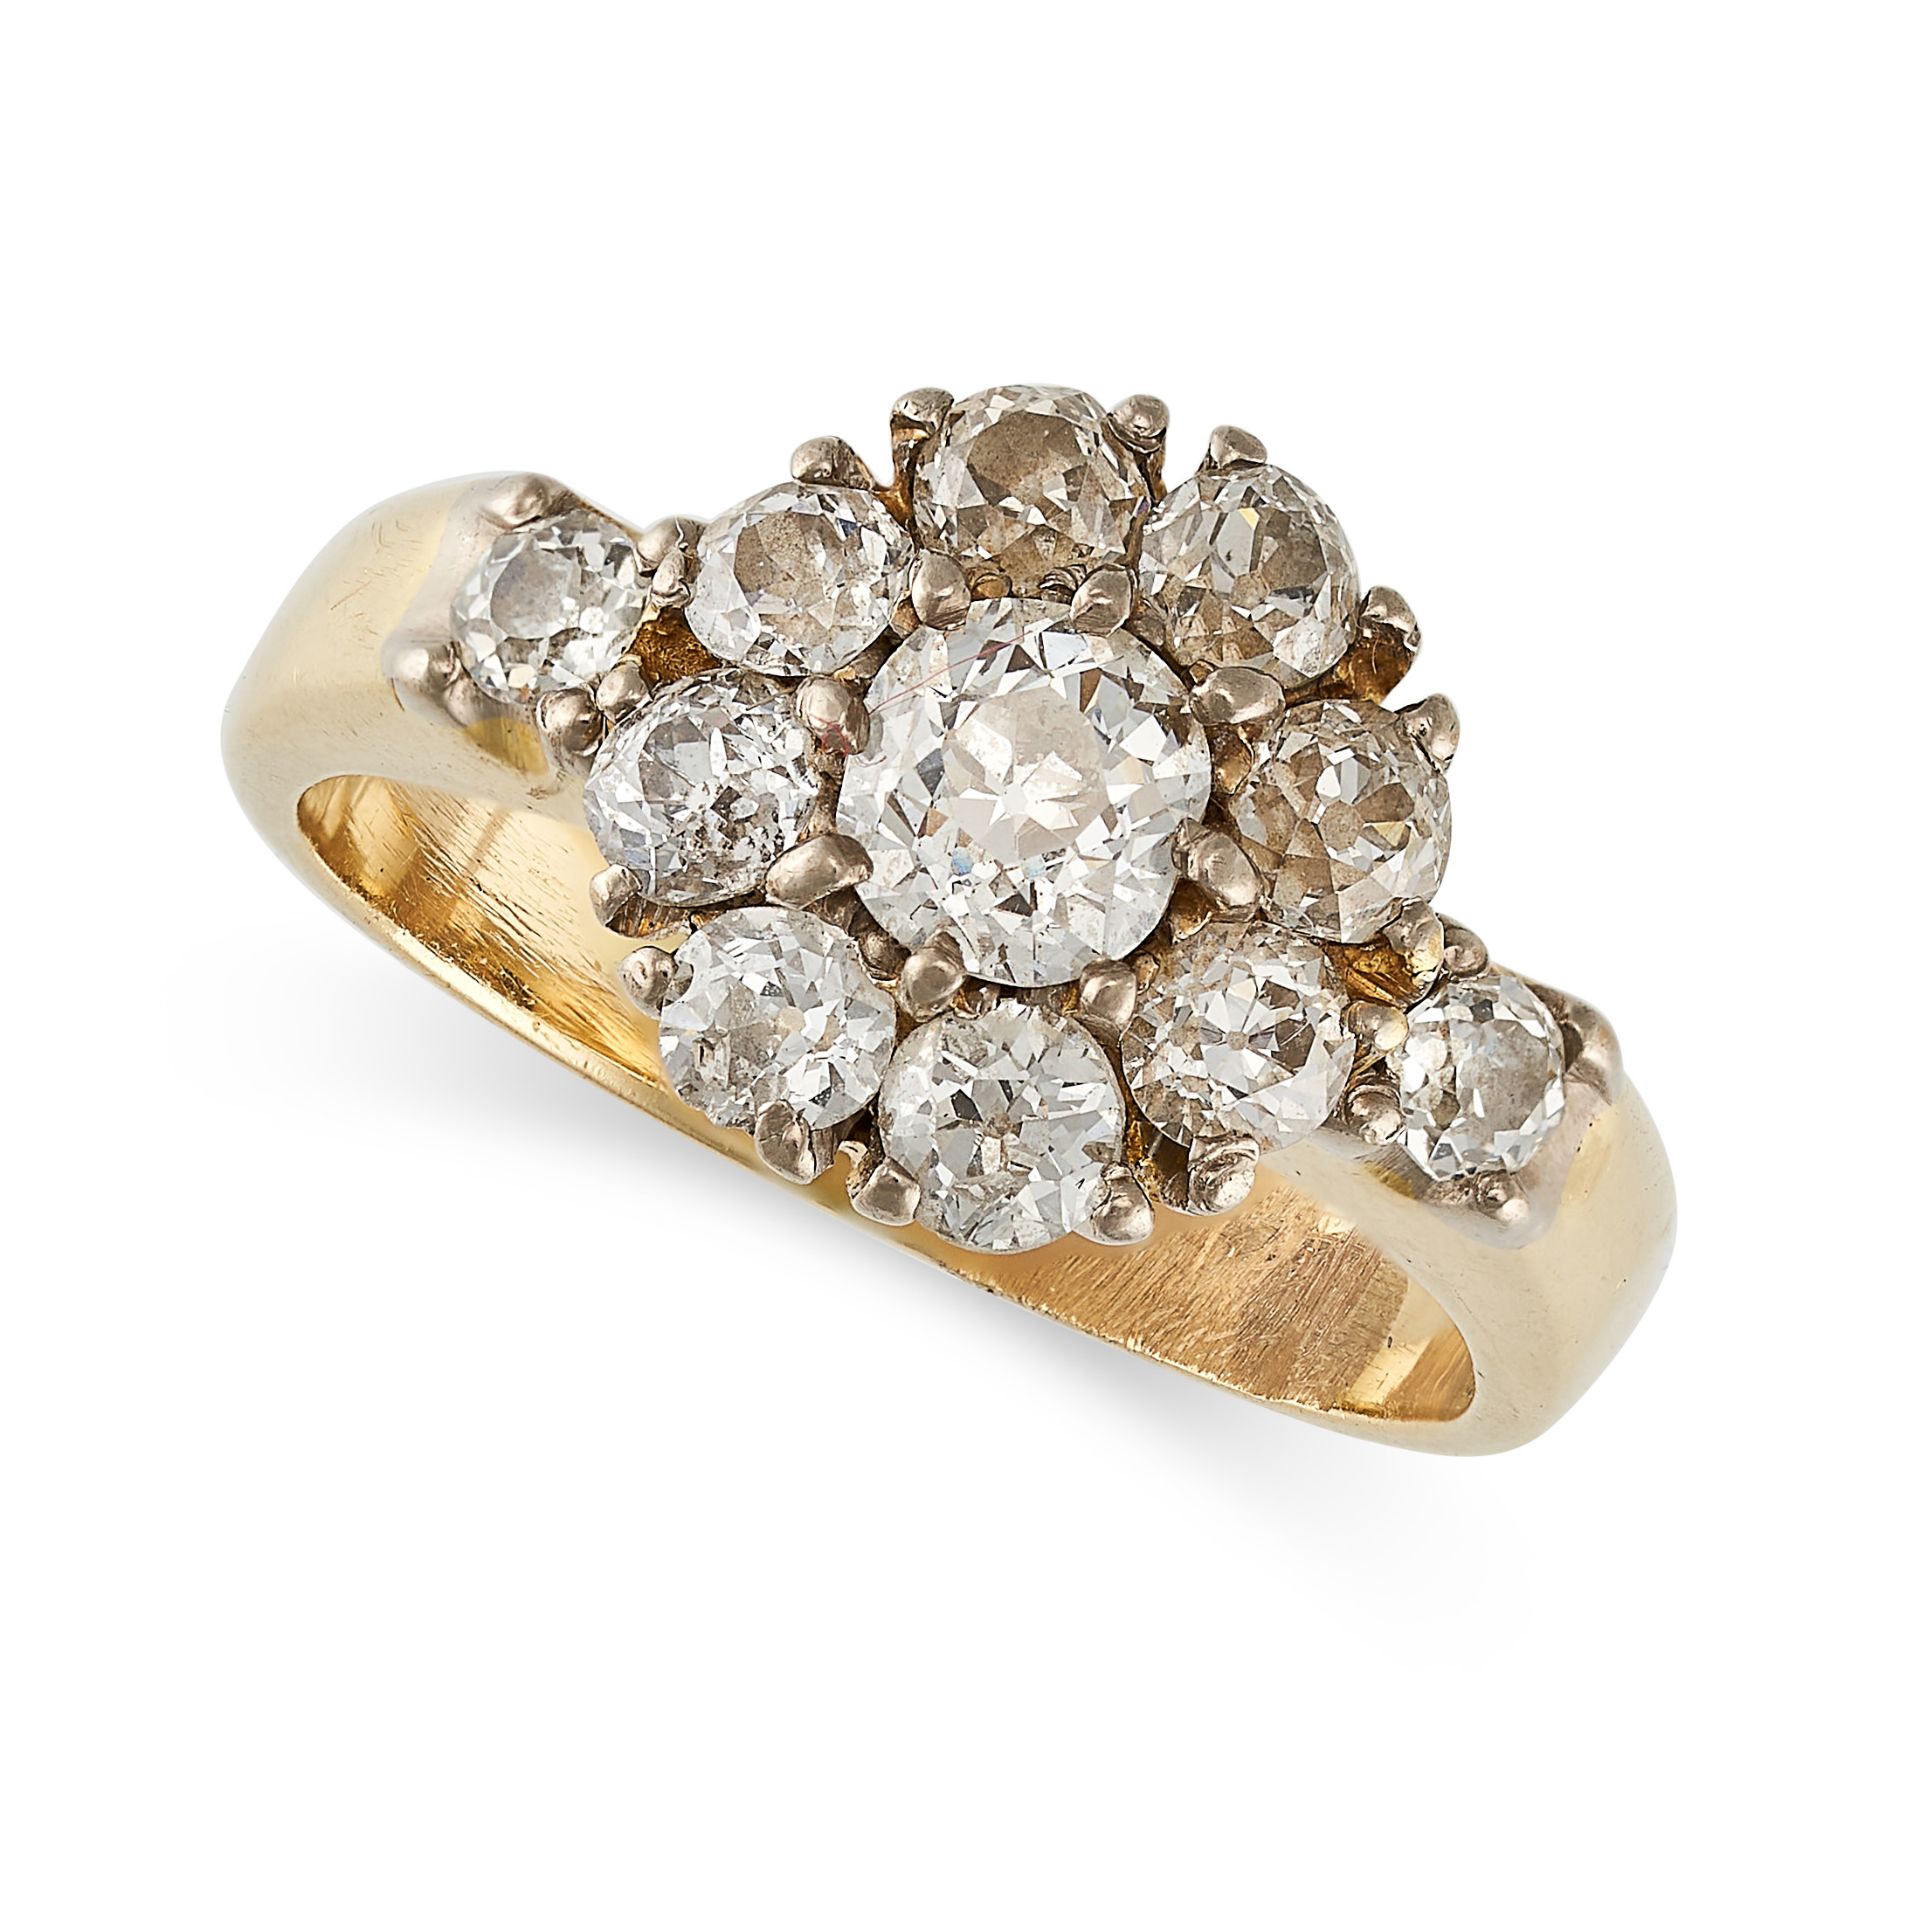 A DIAMOND CLUSTER RING in yellow gold, set with a cluster of old cut diamonds with two diamonds t...